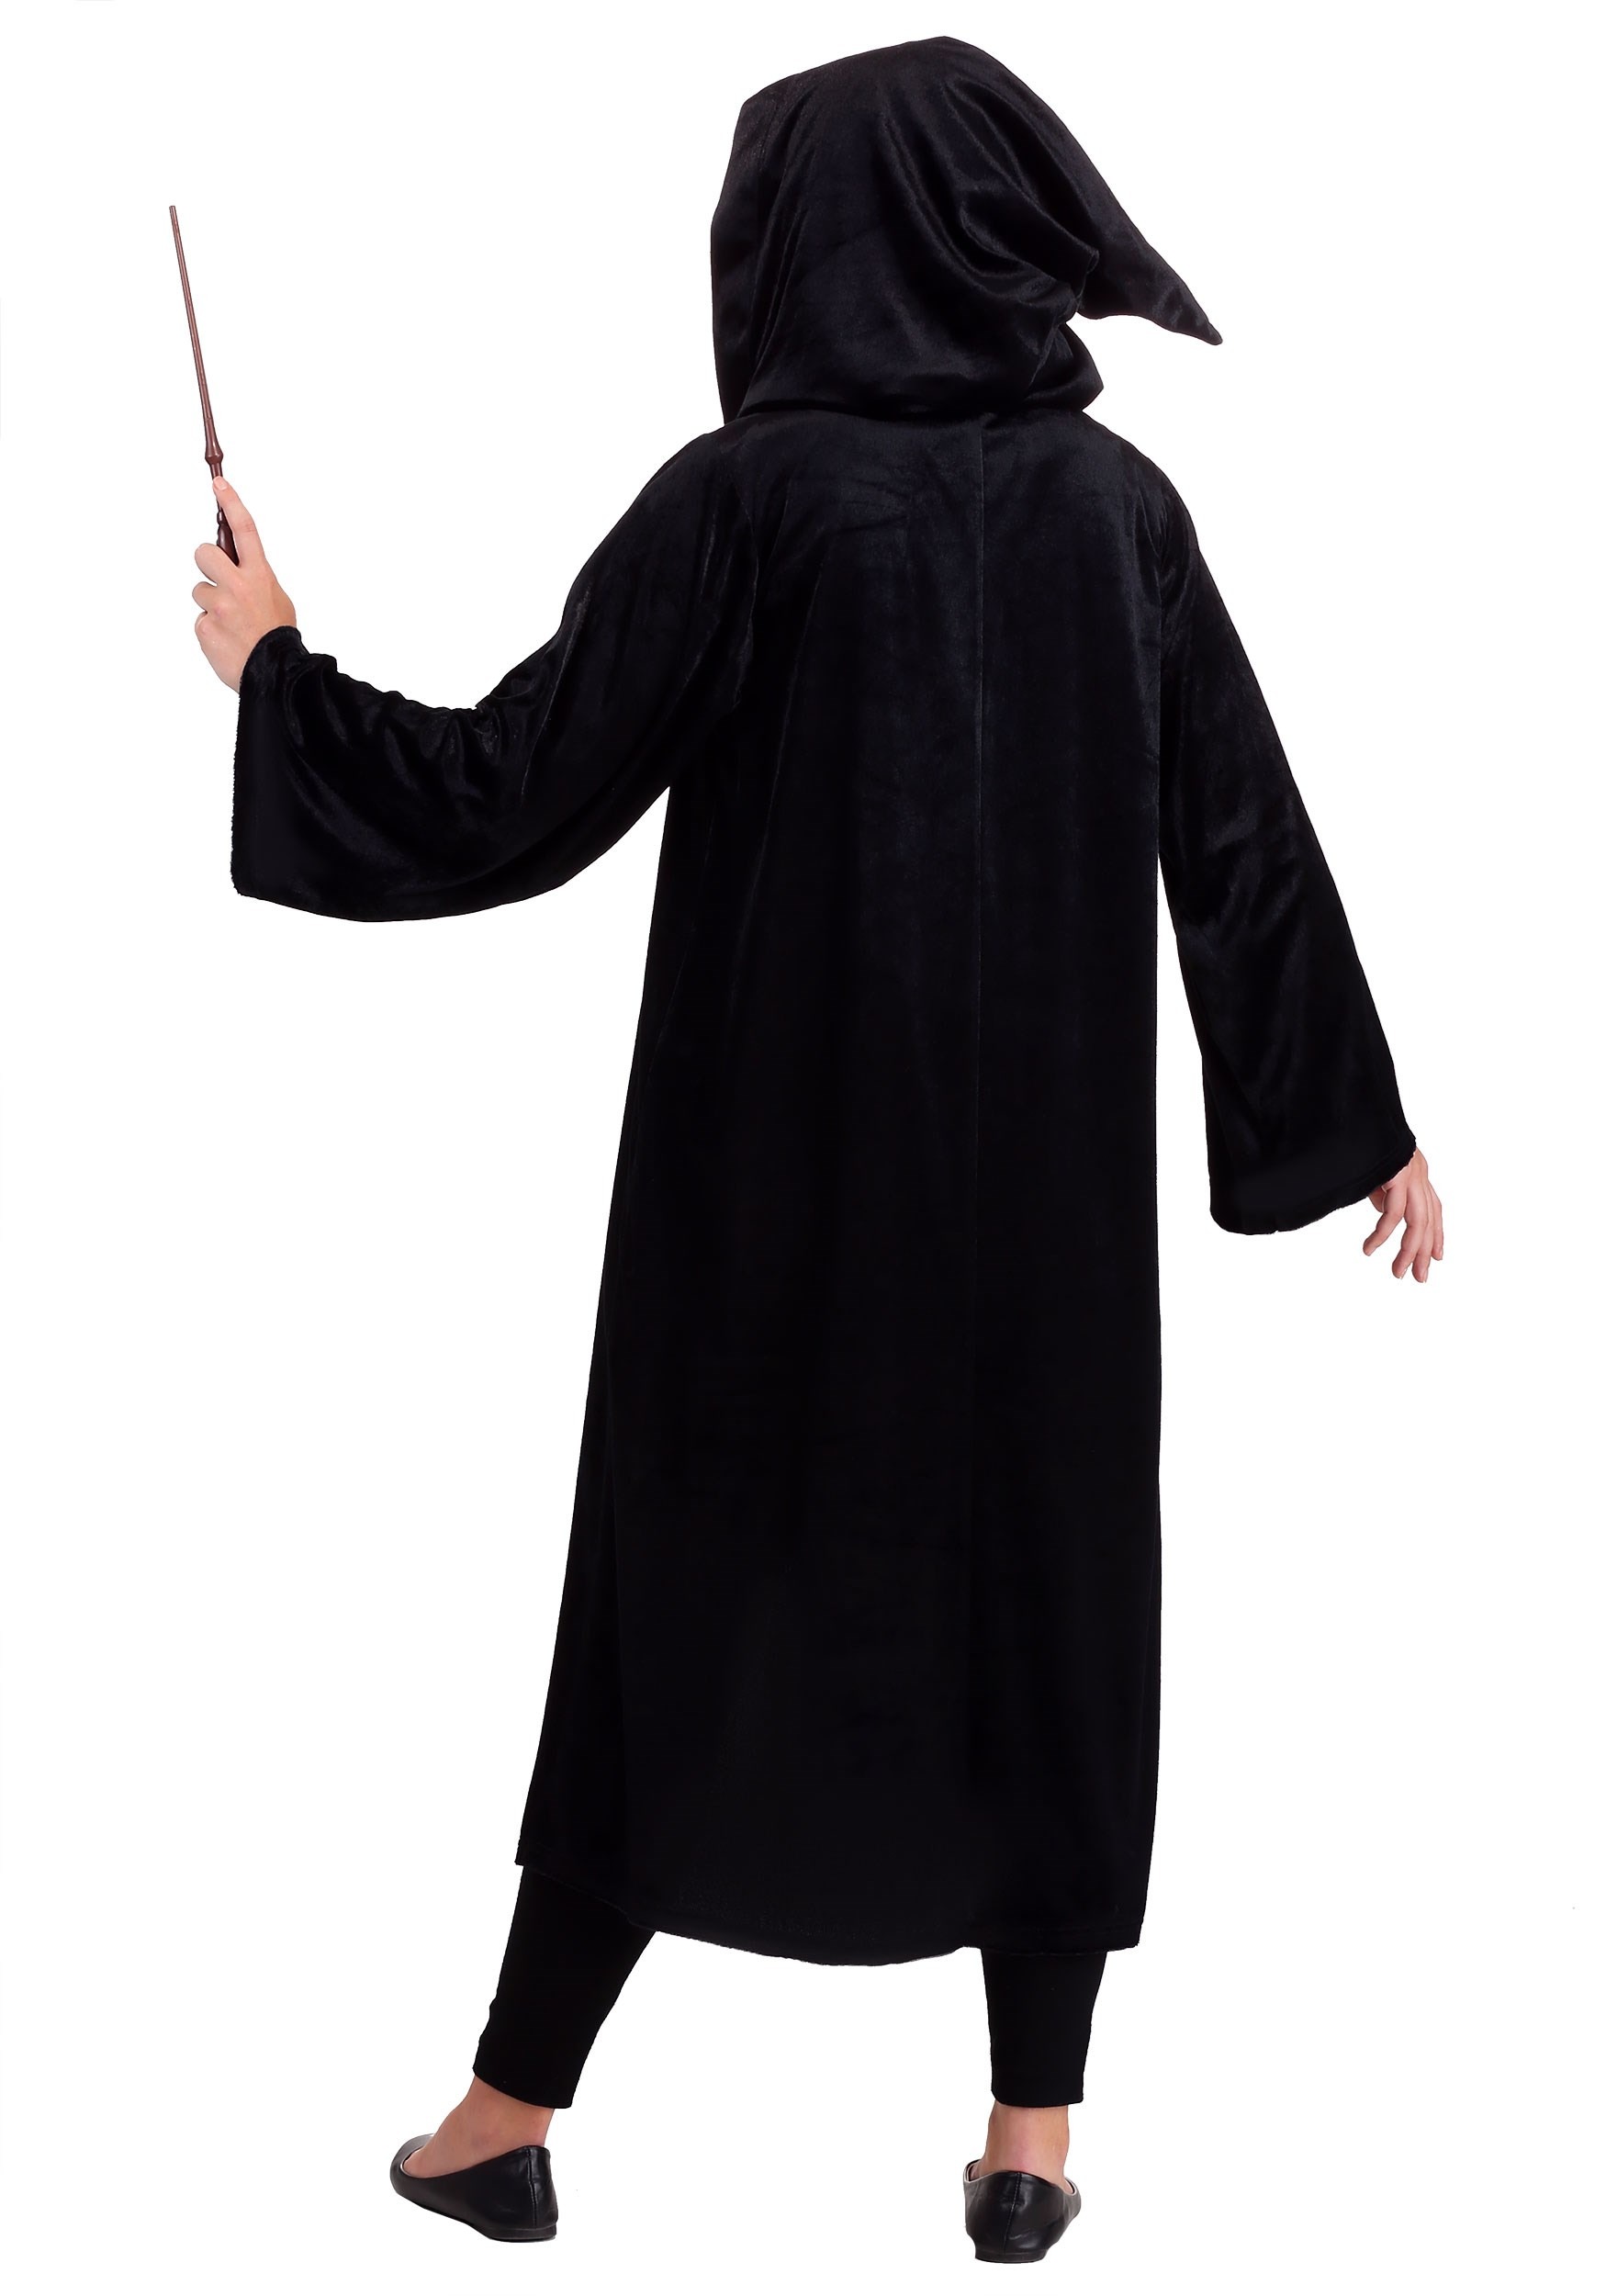 Harry Potter Plus Size Deluxe Adult Ravenclaw Robe